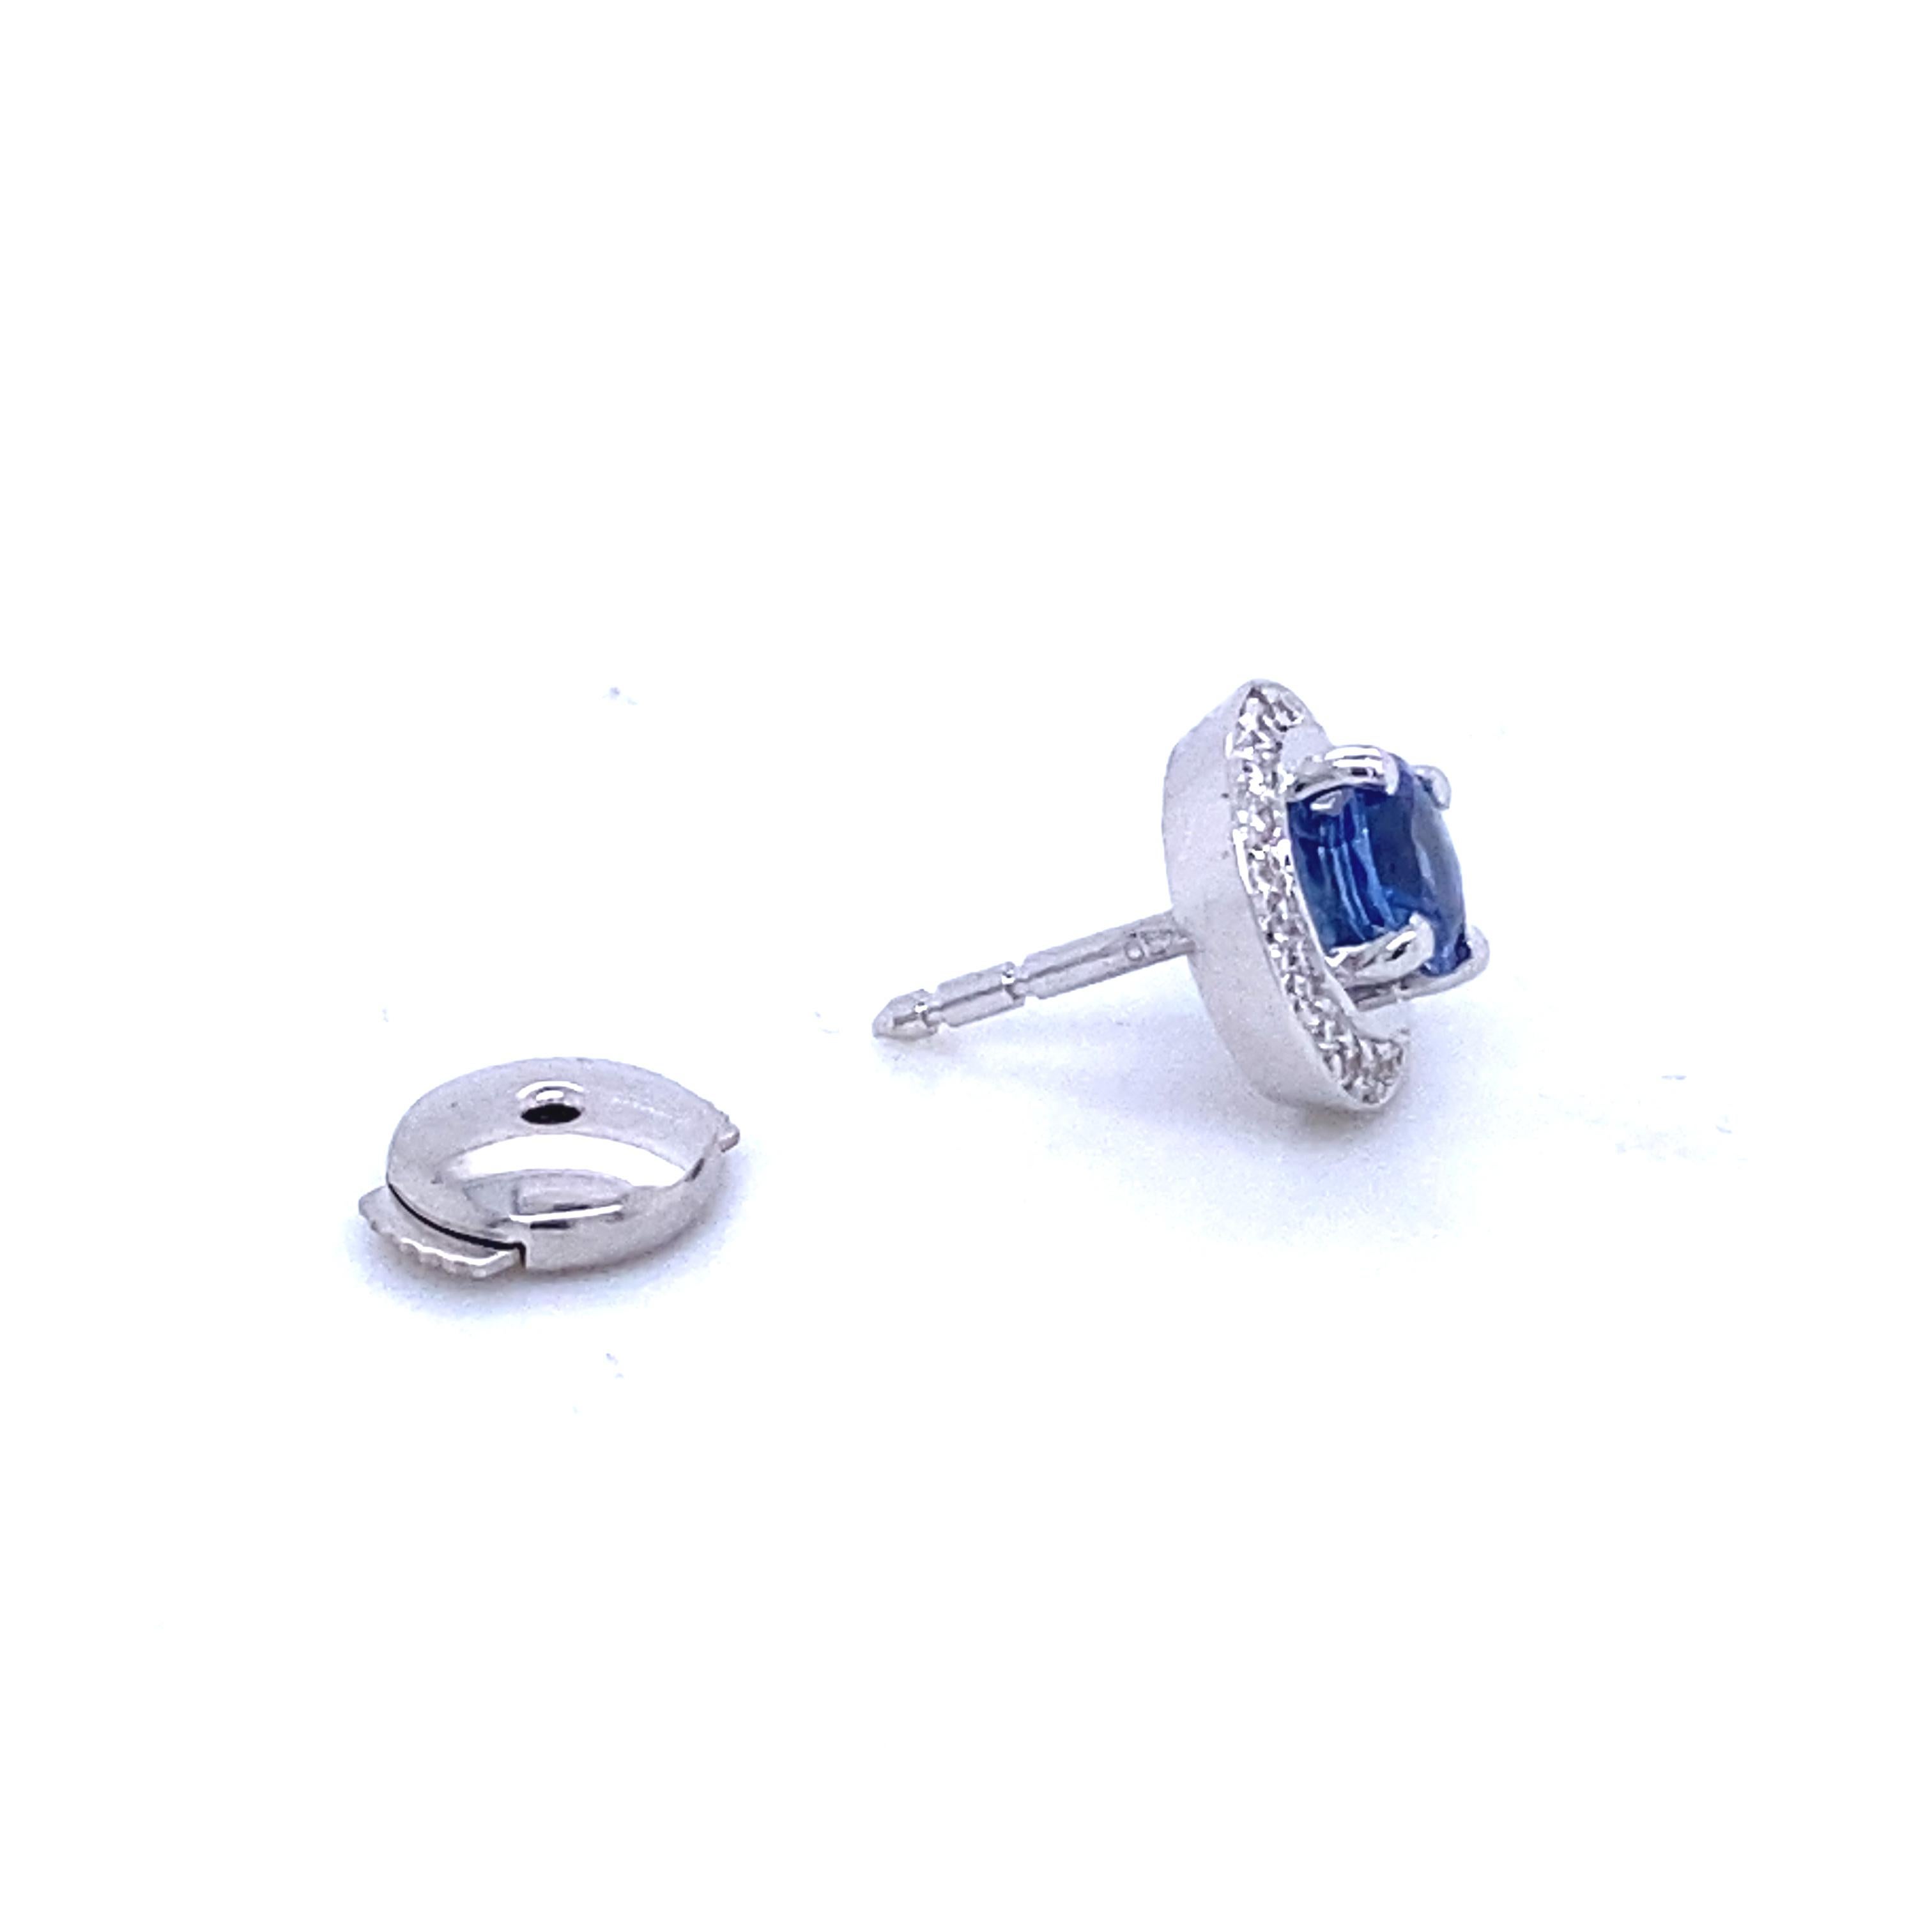 White Gold earrings with Ceylon Sapphire and Diamonds

18 Carat white gold ring surmounted by a round Ceylon sapphire which weighs 1.33 Carat and accompanied by diamonds which weigh a total of 0.28 Carat. The size of the earrings is 0.9 cm in length